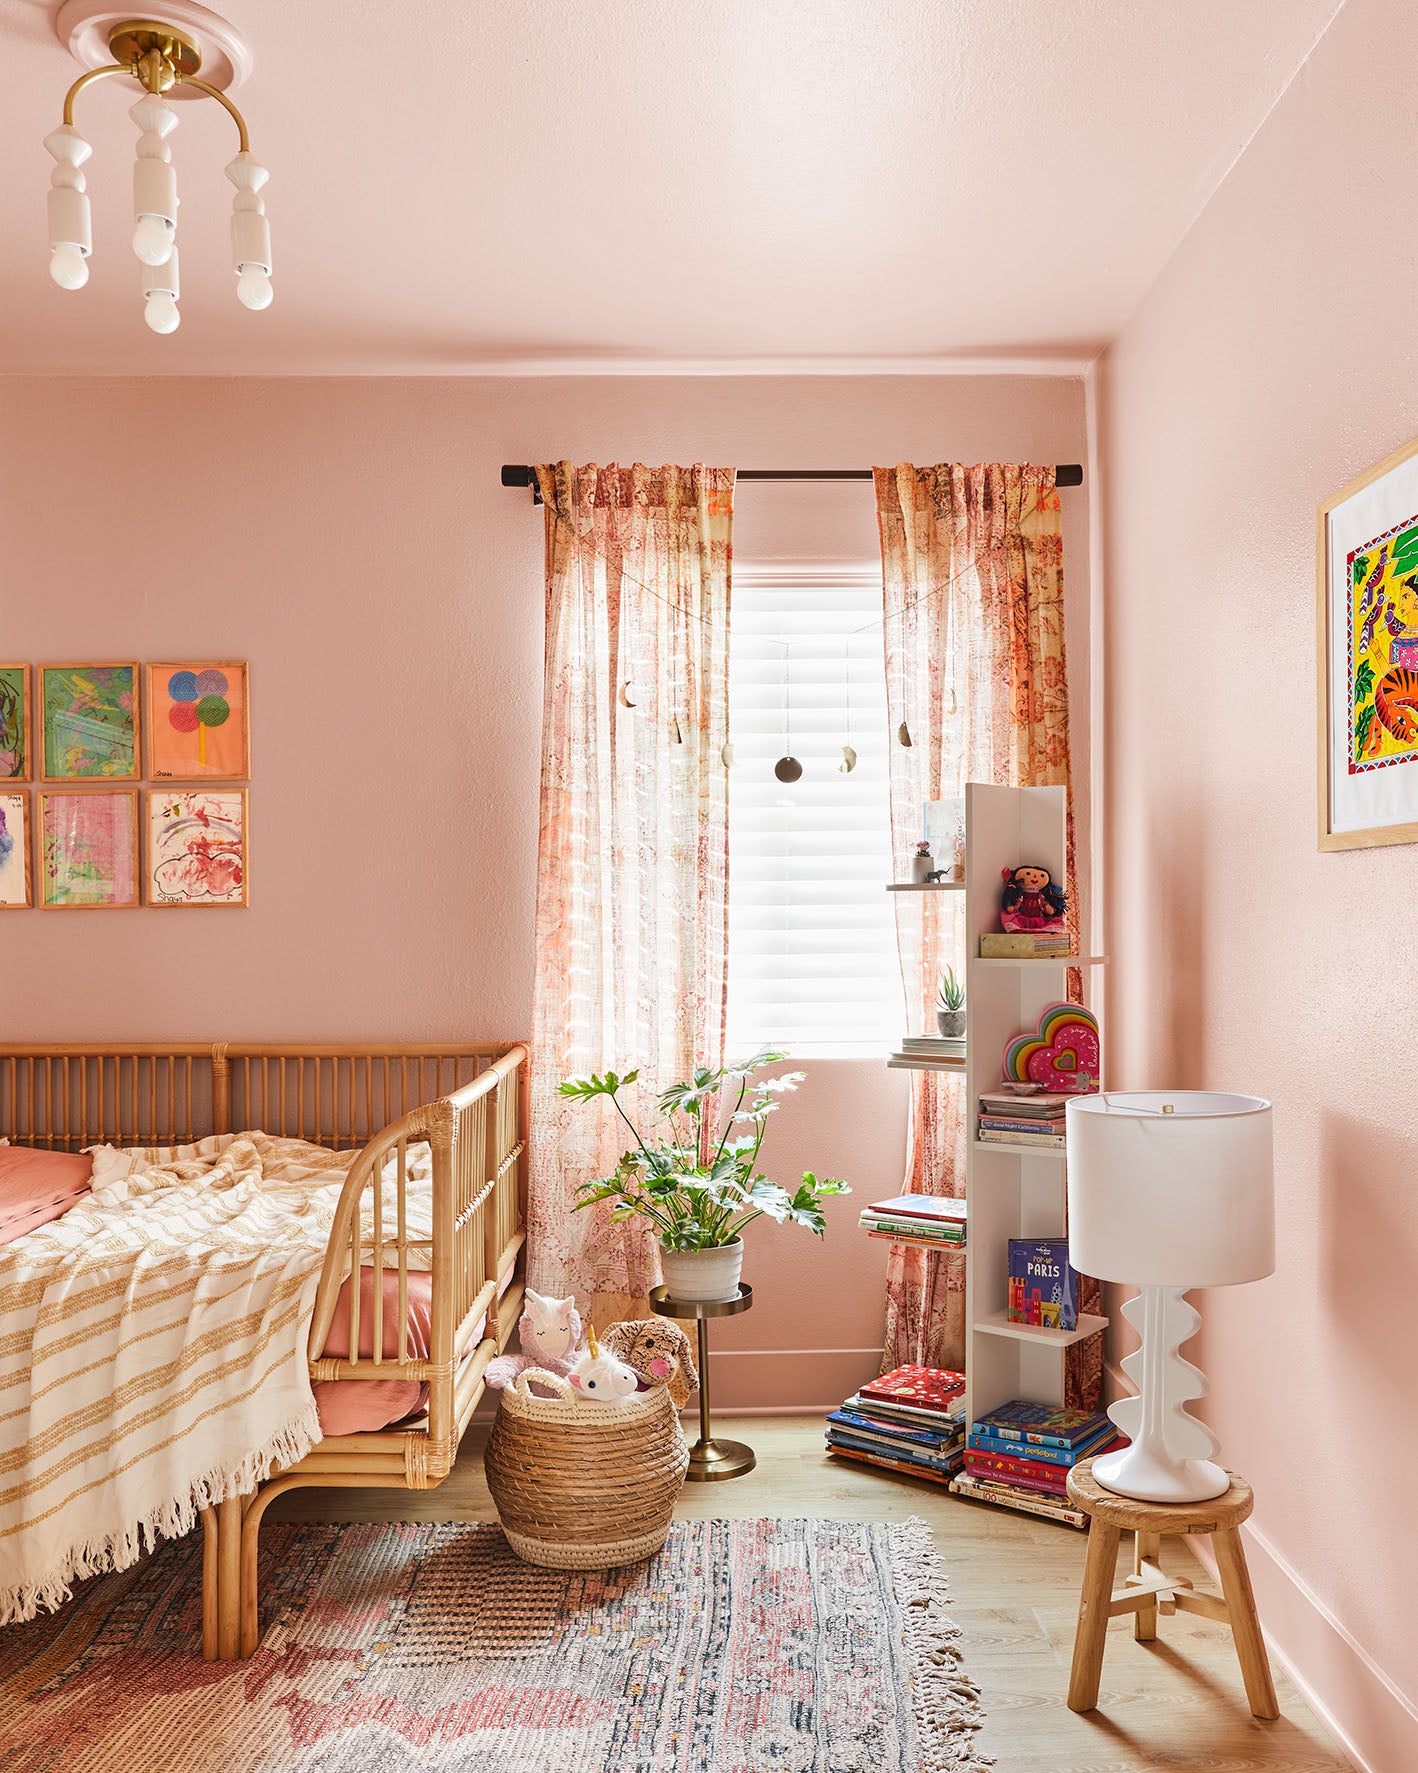 When decorating her little girl's room, designer Hema Persad chose Meet Cute, a rosy pink wall color.